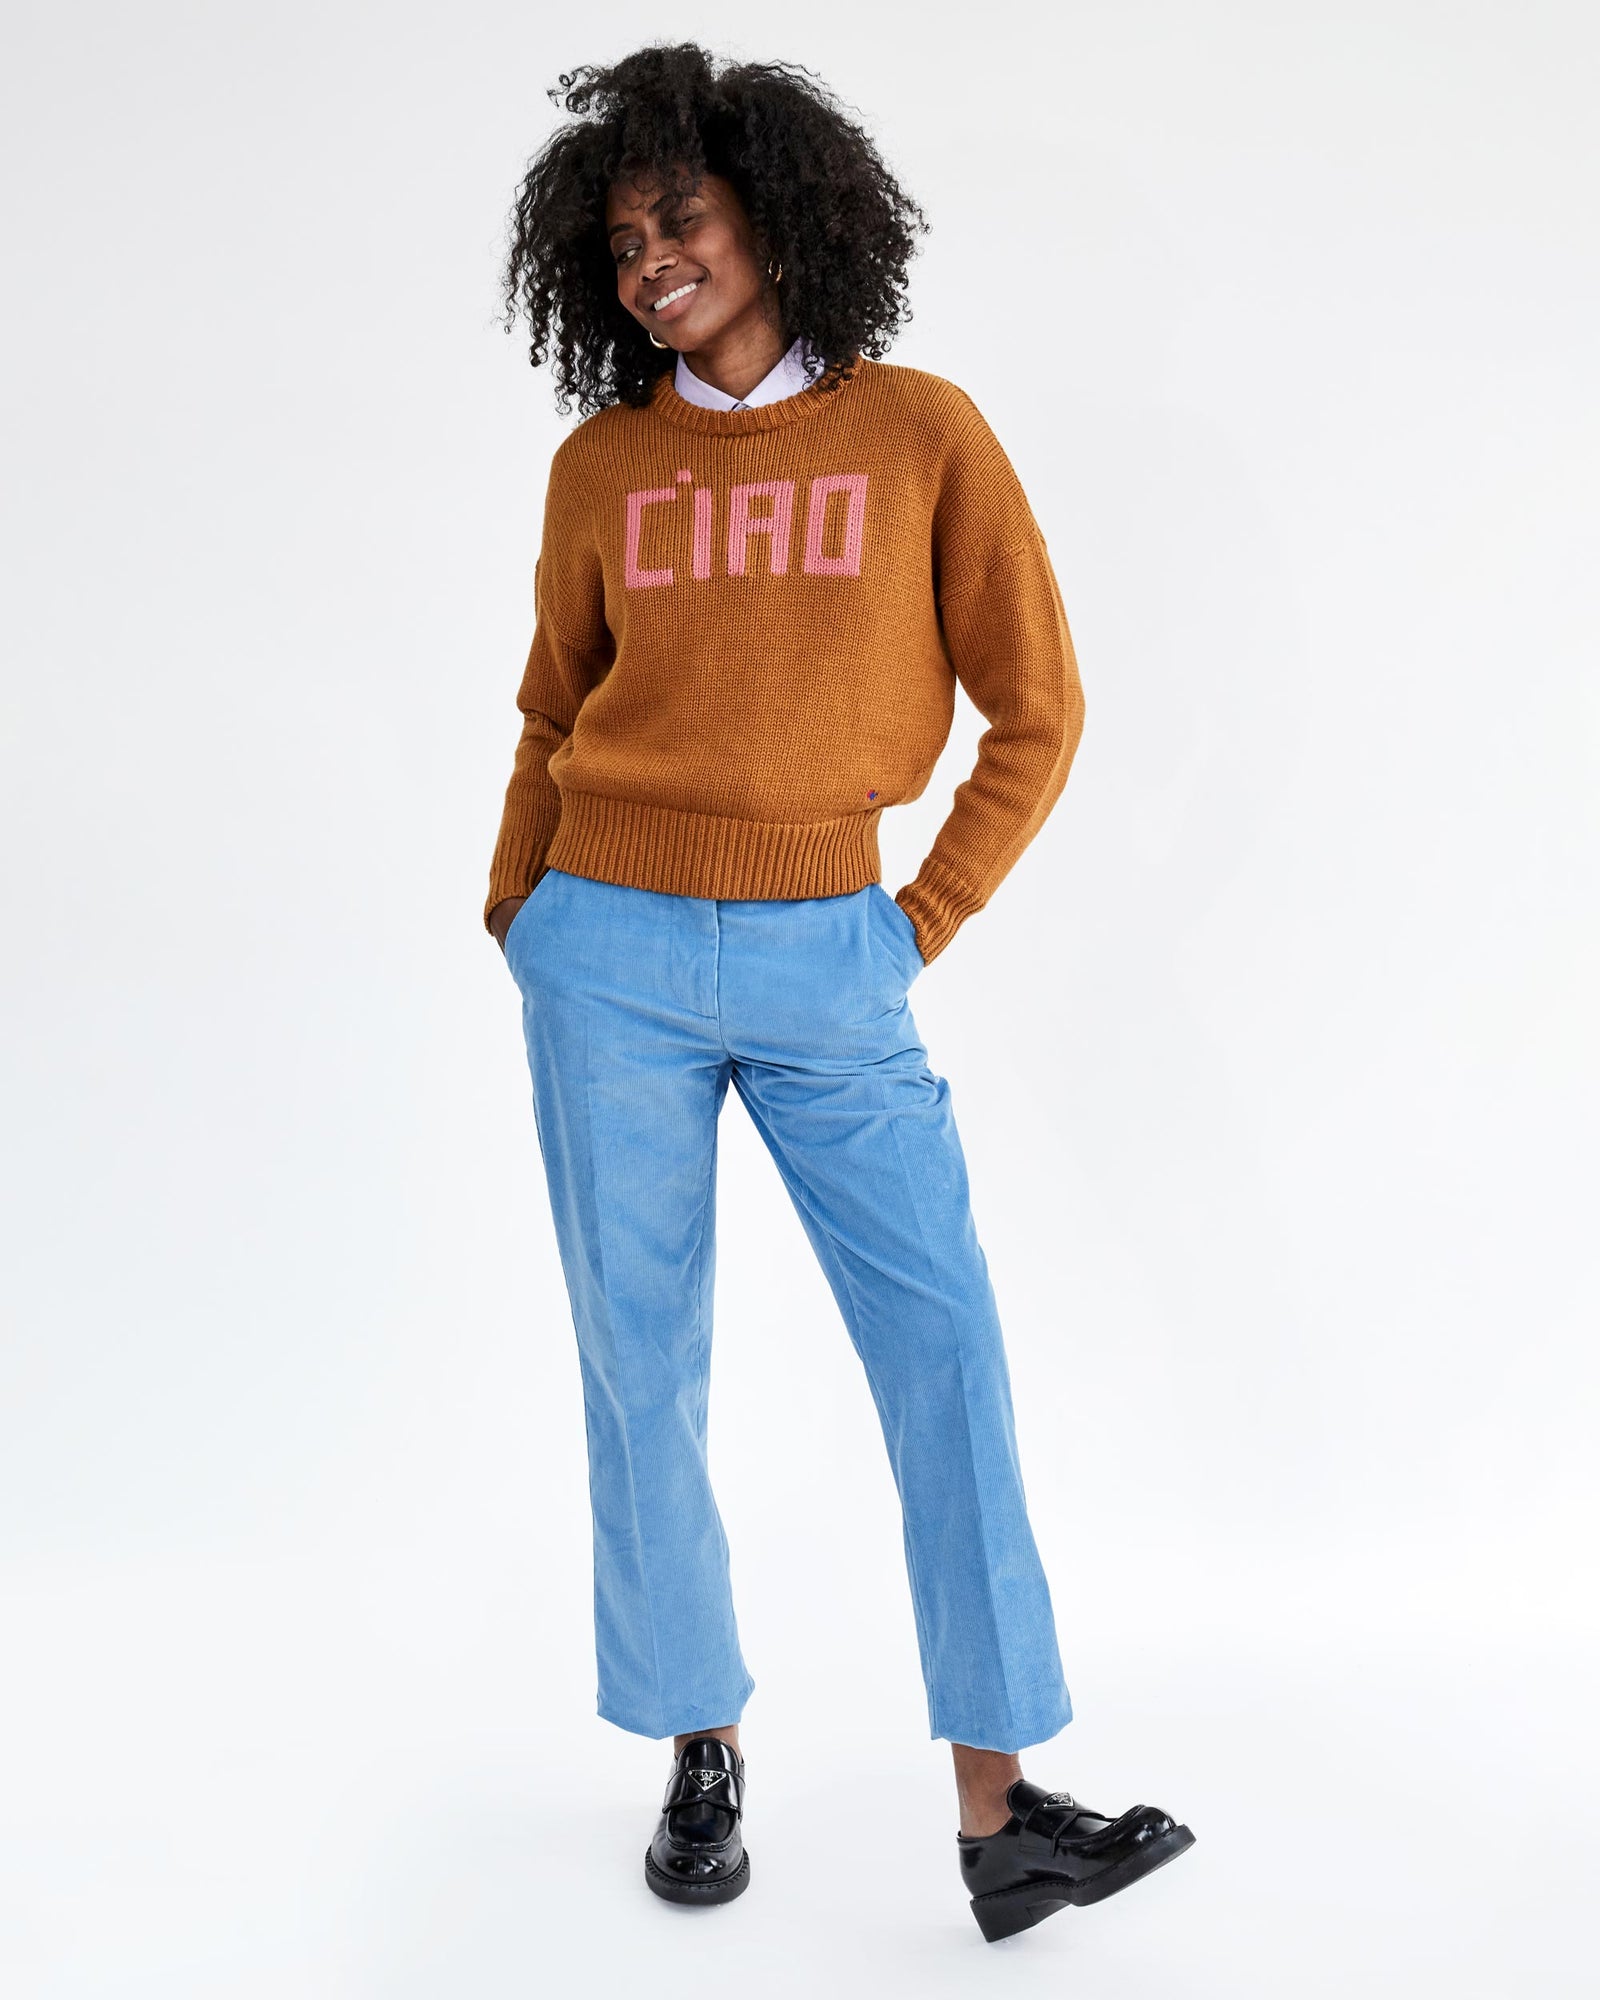 Mecca Wearing the Gingernut w/ Petal Ciao Drop Shoulder Sweater  with her Hands in her Pockets